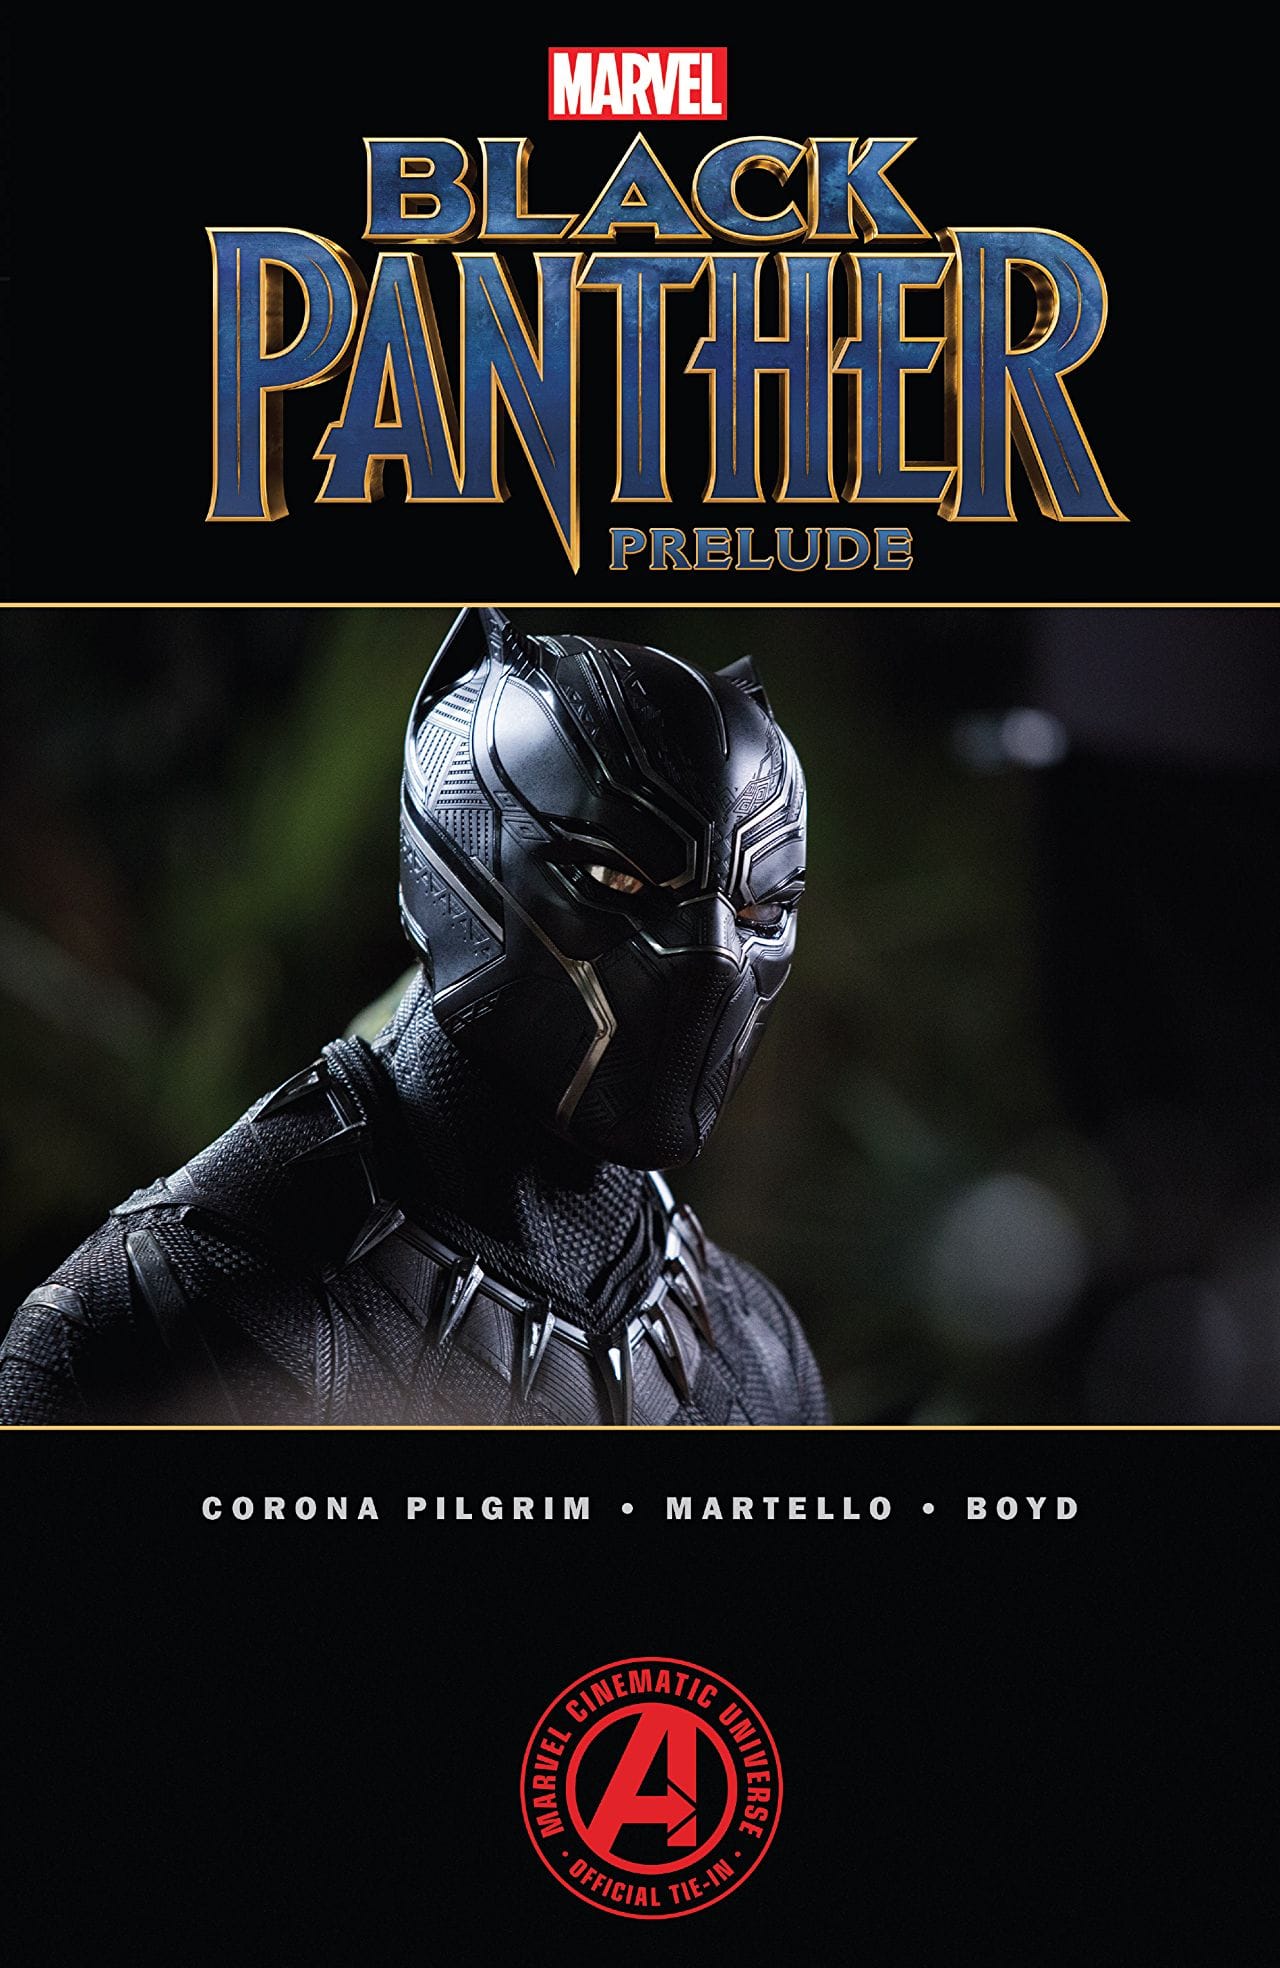 'Black Panther Prelude: MCU Tie-in' is an excellent primer for a lesser-known hero